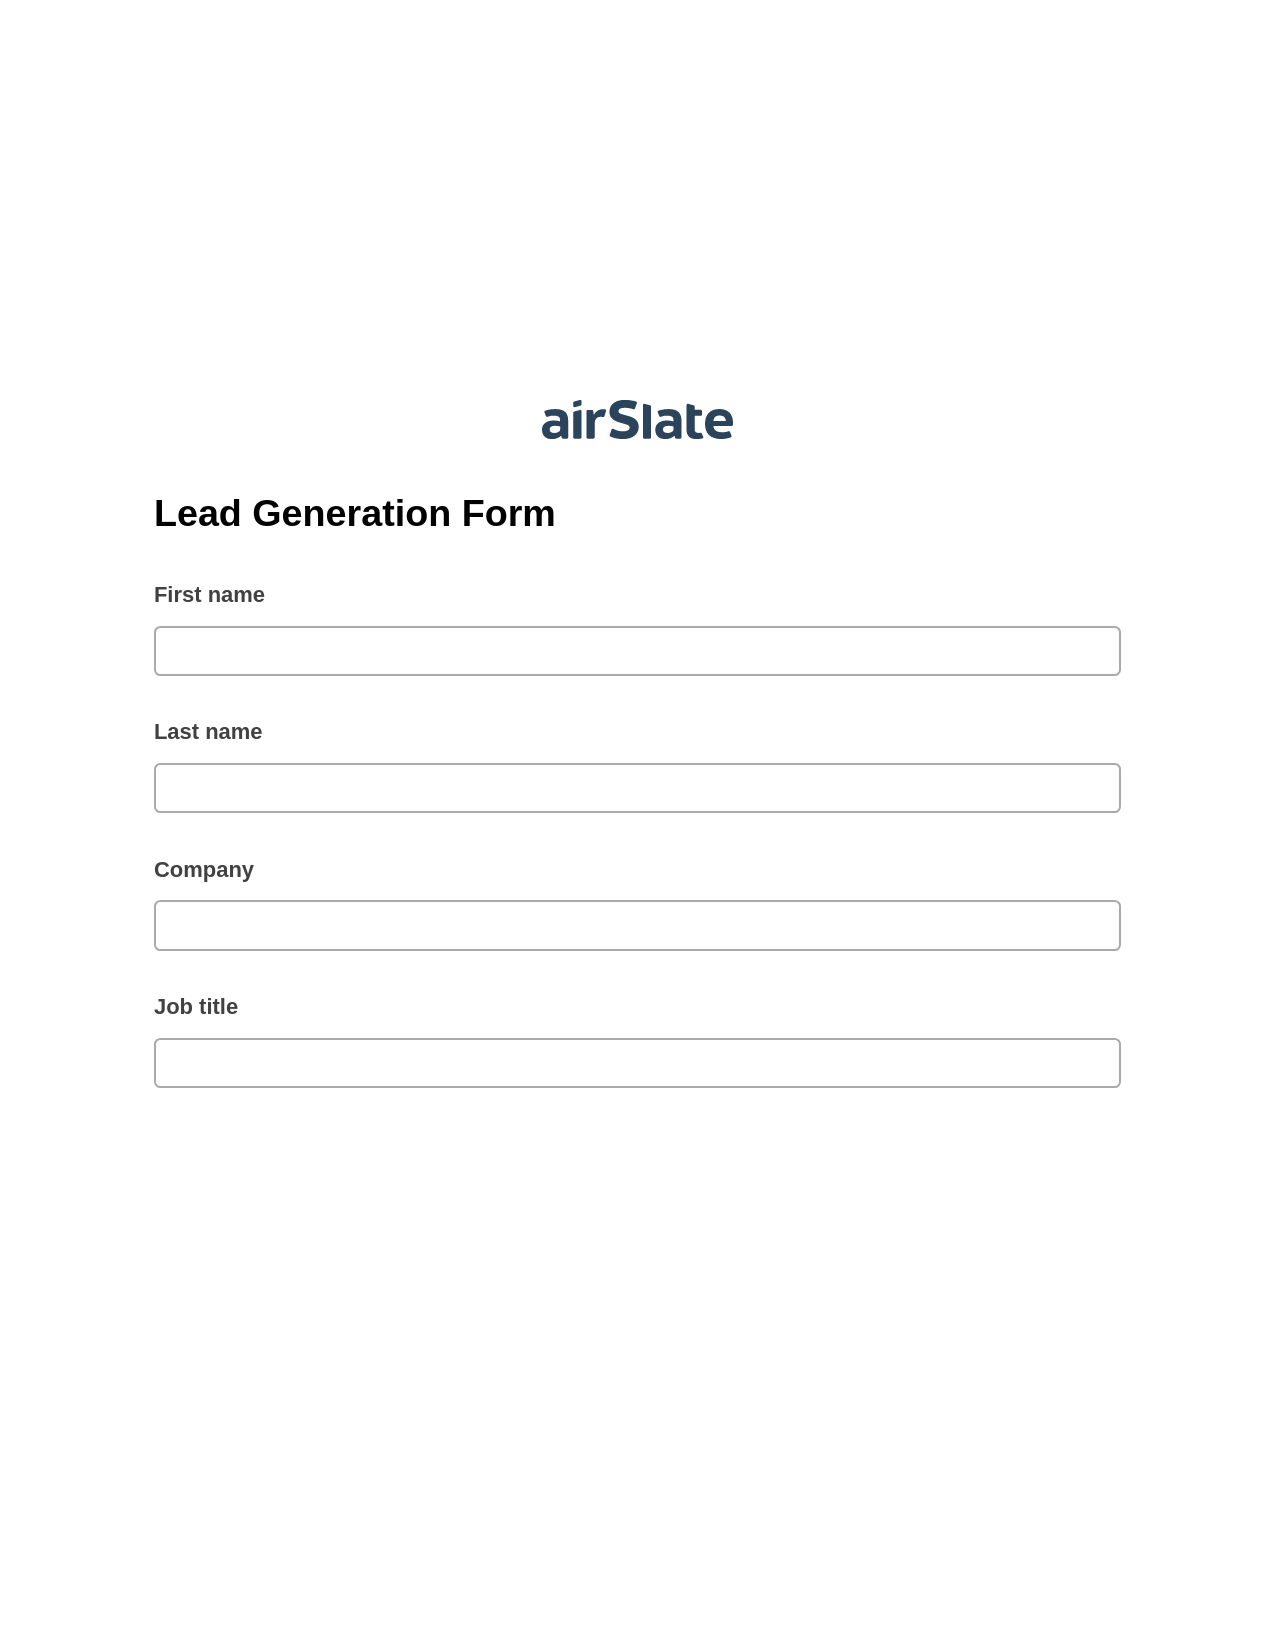 Lead Generation Form Pre-fill Document Bot, Add Tags to Slate Bot, Archive to Google Drive Bot